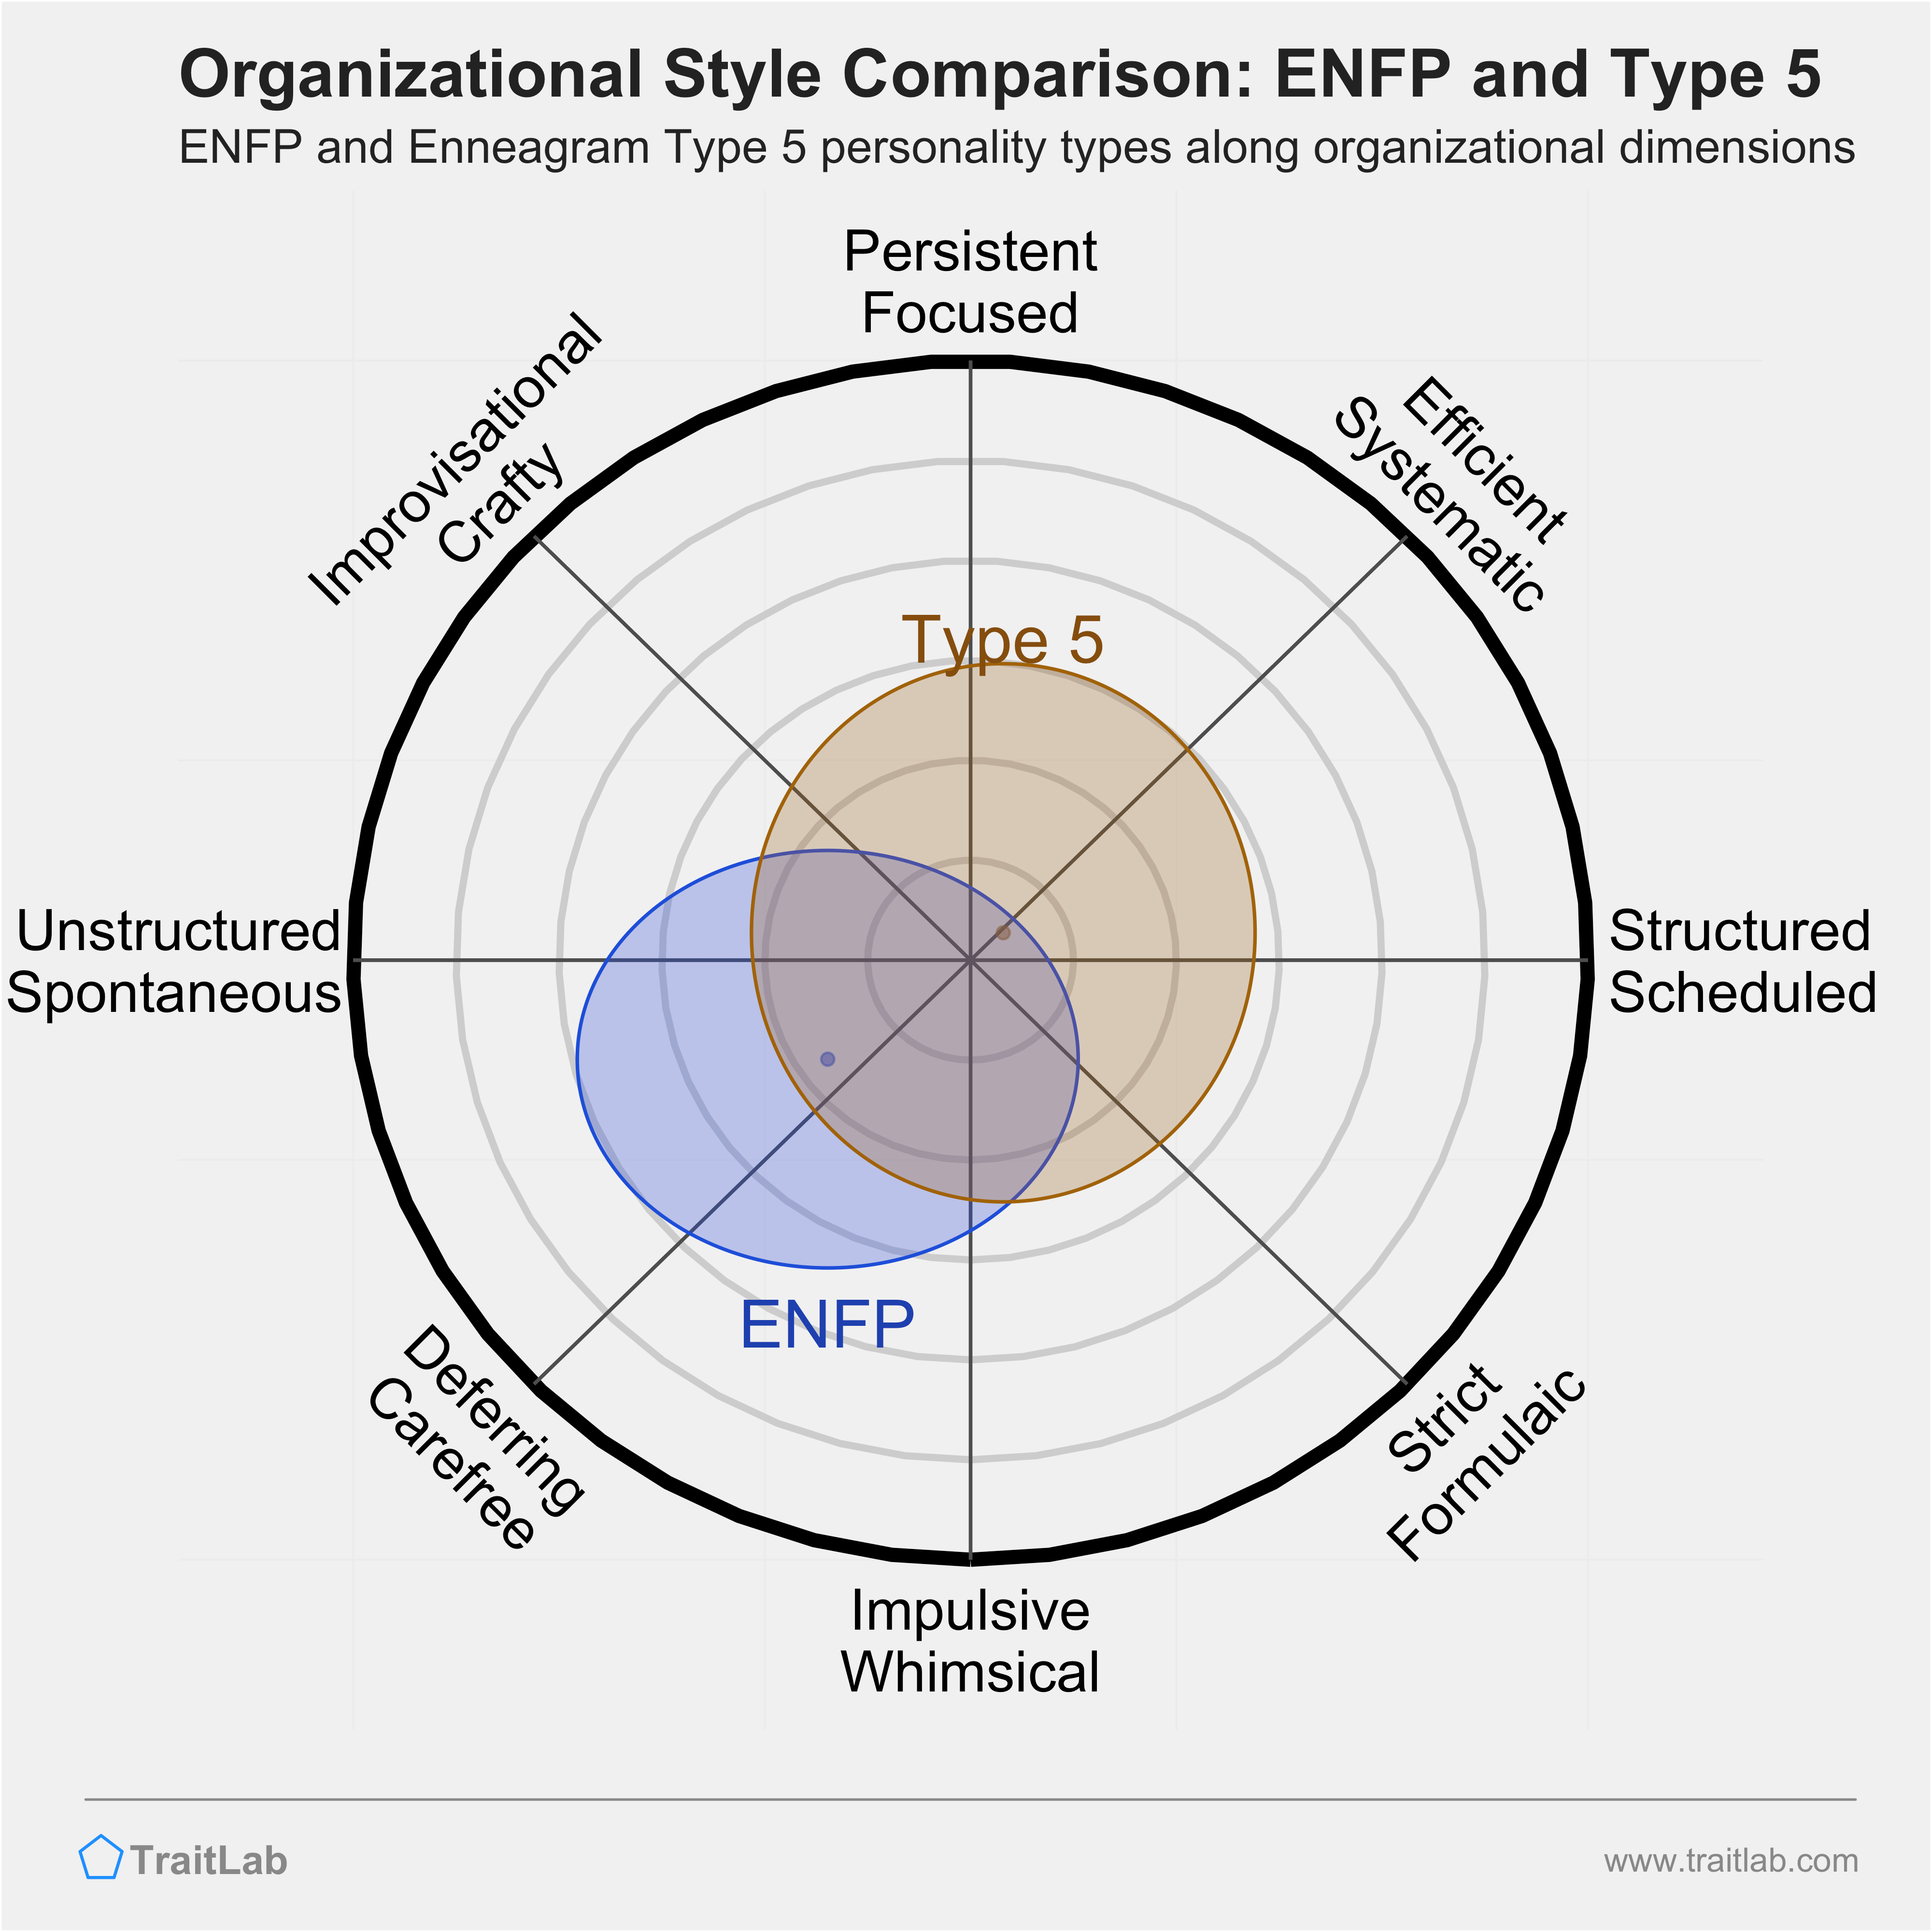 ENFP and Type 5 comparison across organizational dimensions